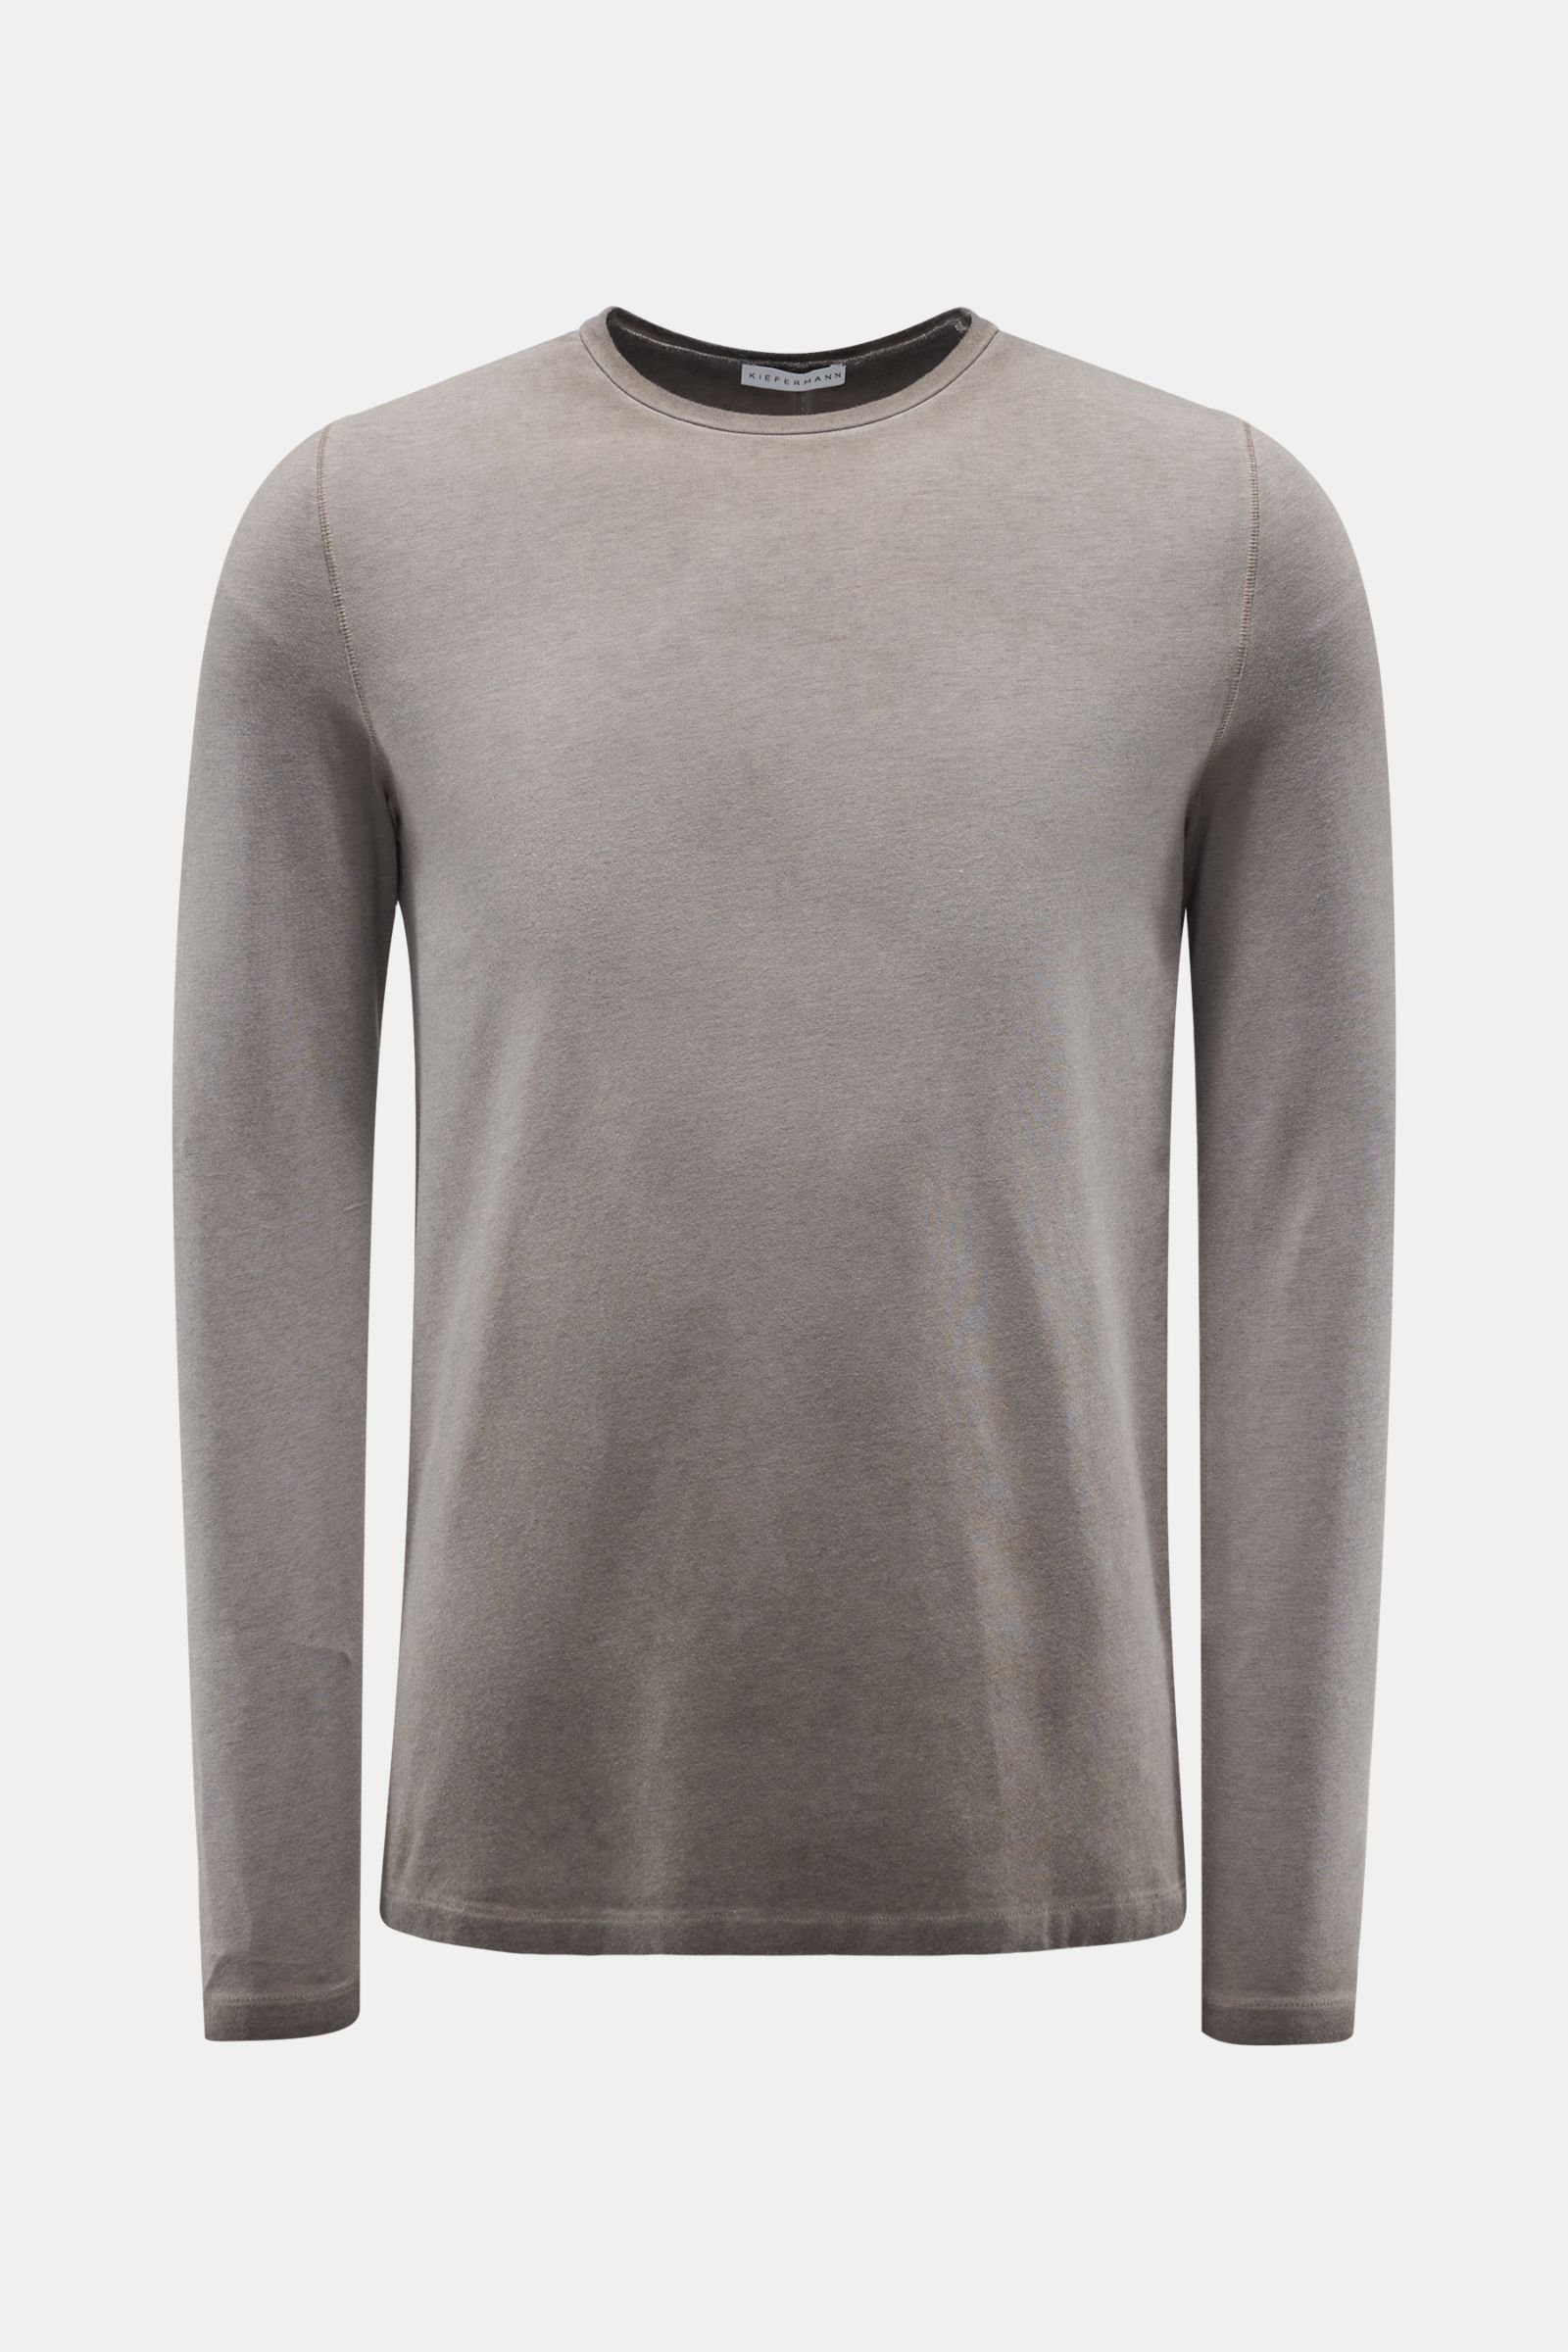 Crew neck long sleeve 'Mikael' grey-brown